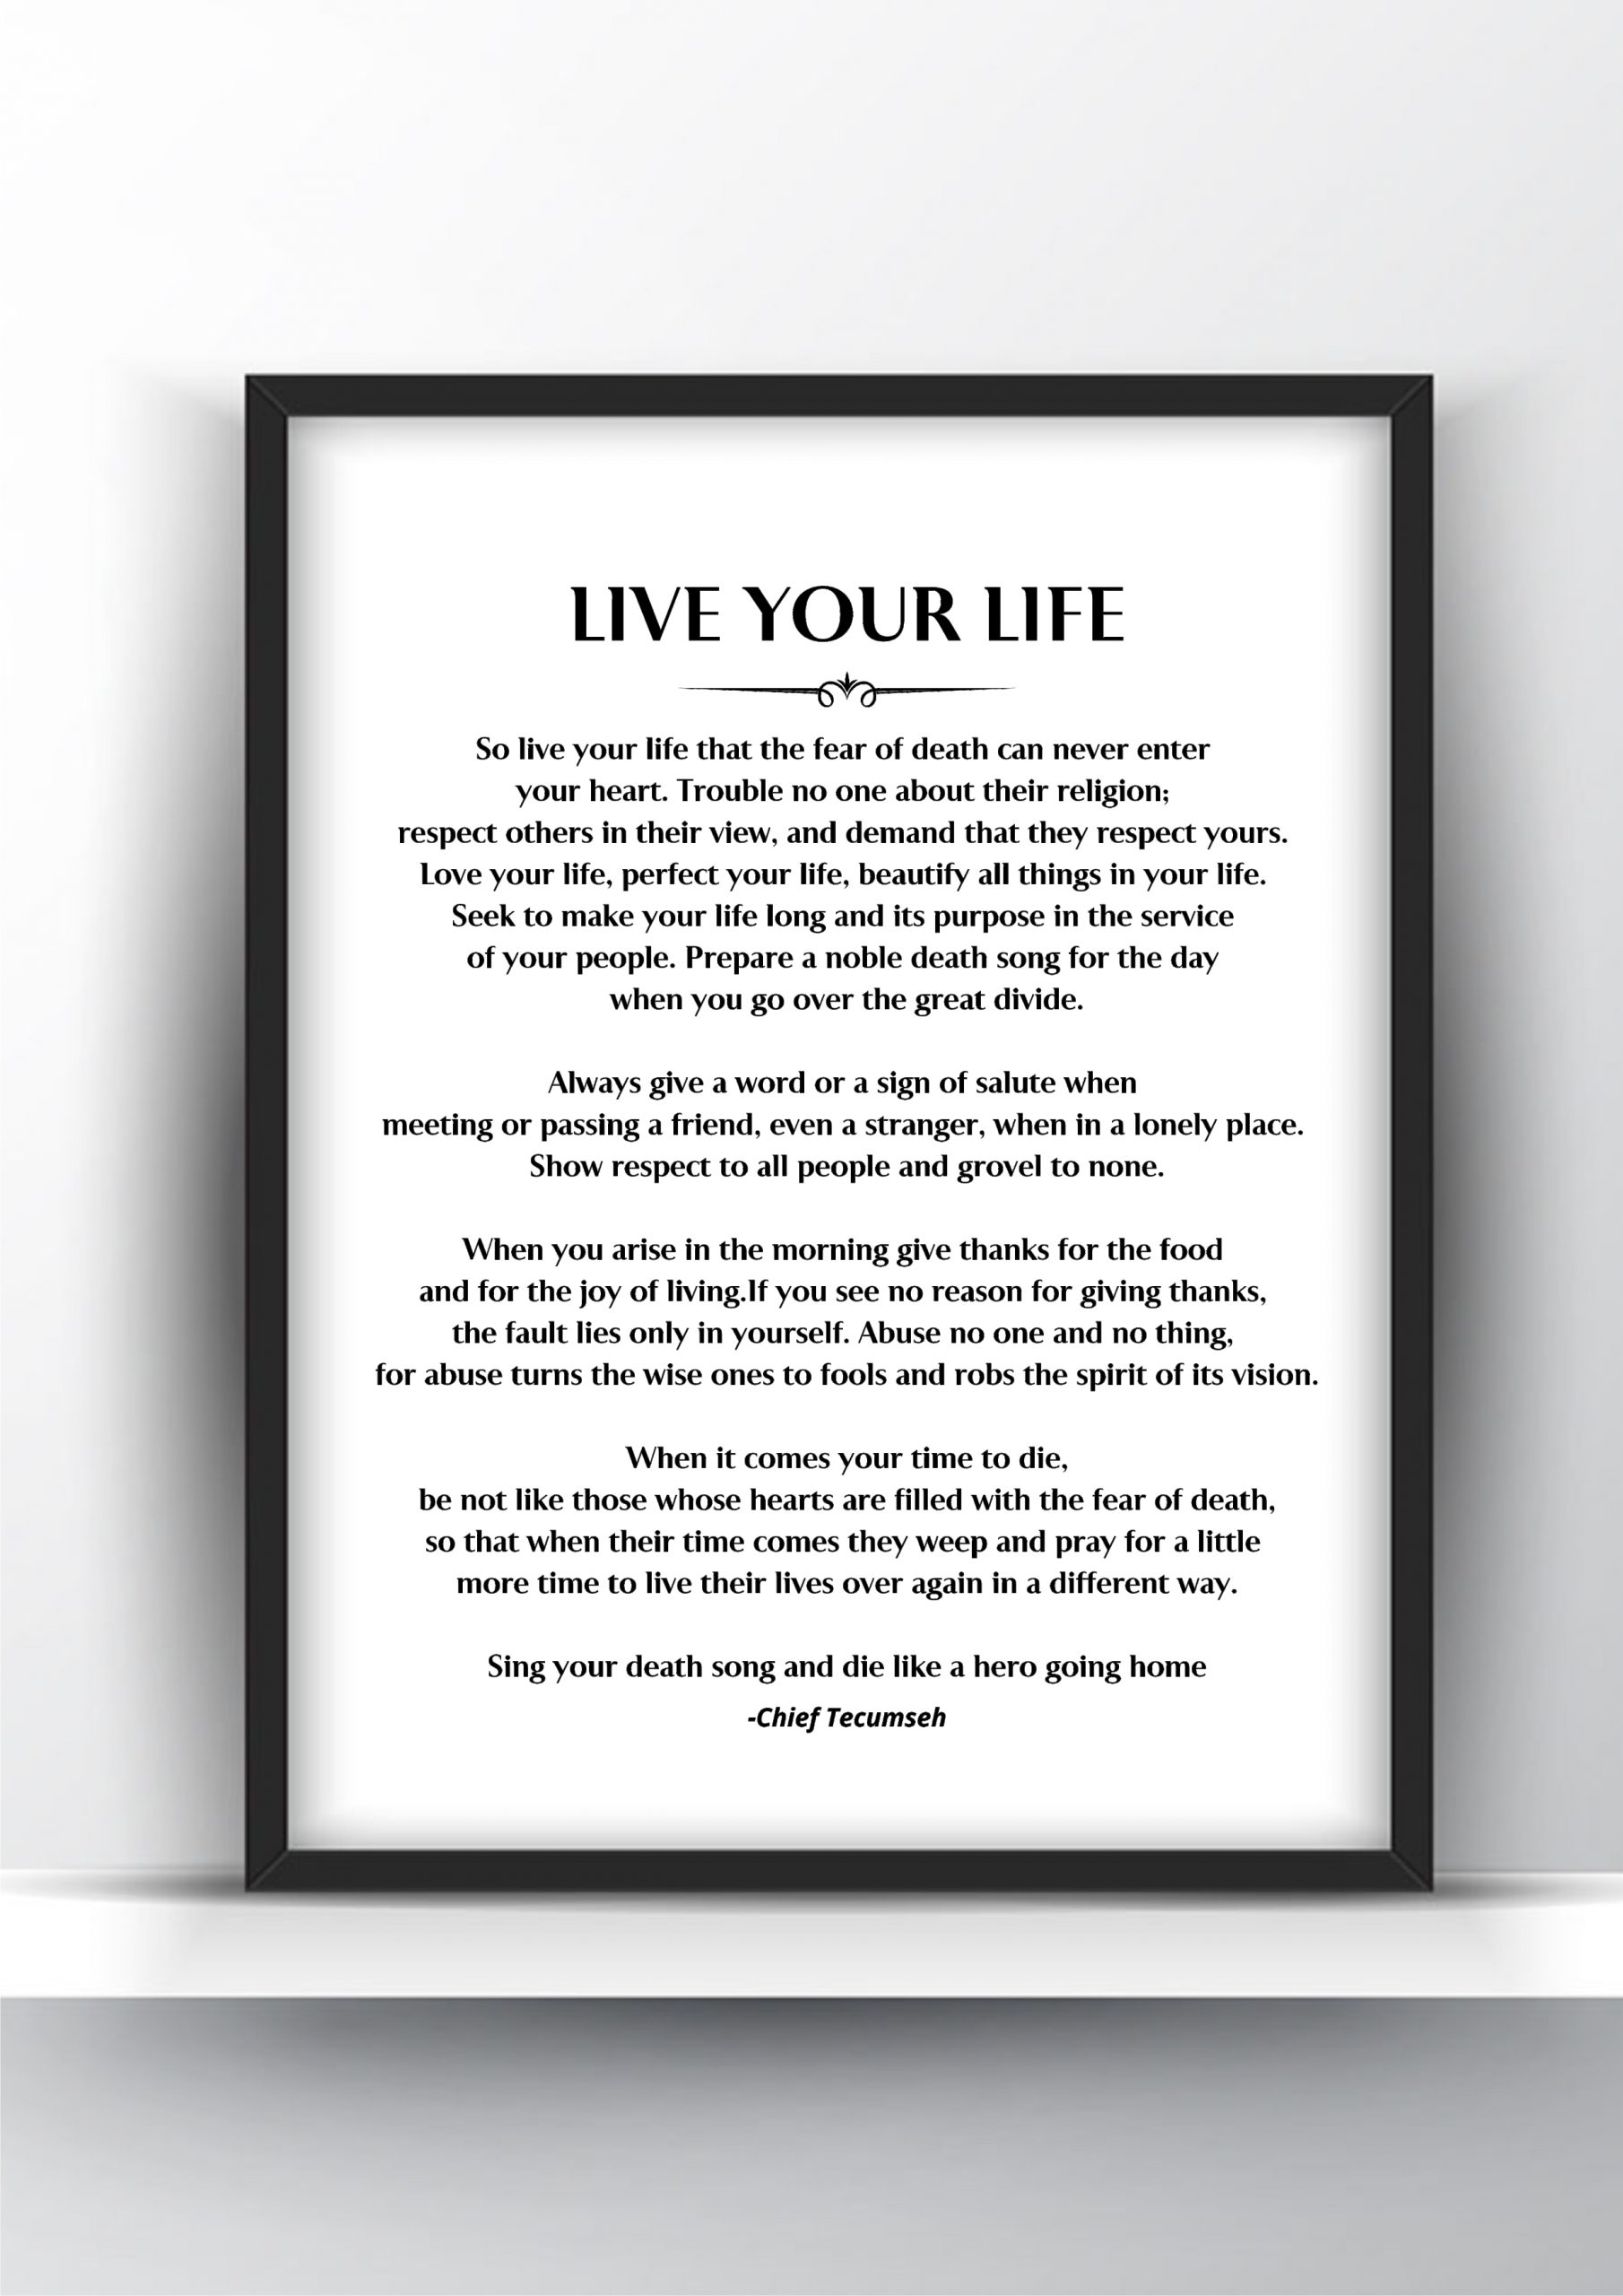 Chief Tecumseh Poem - Live Your Life Jigsaw Puzzle by Celestial Images -  Pixels Puzzles